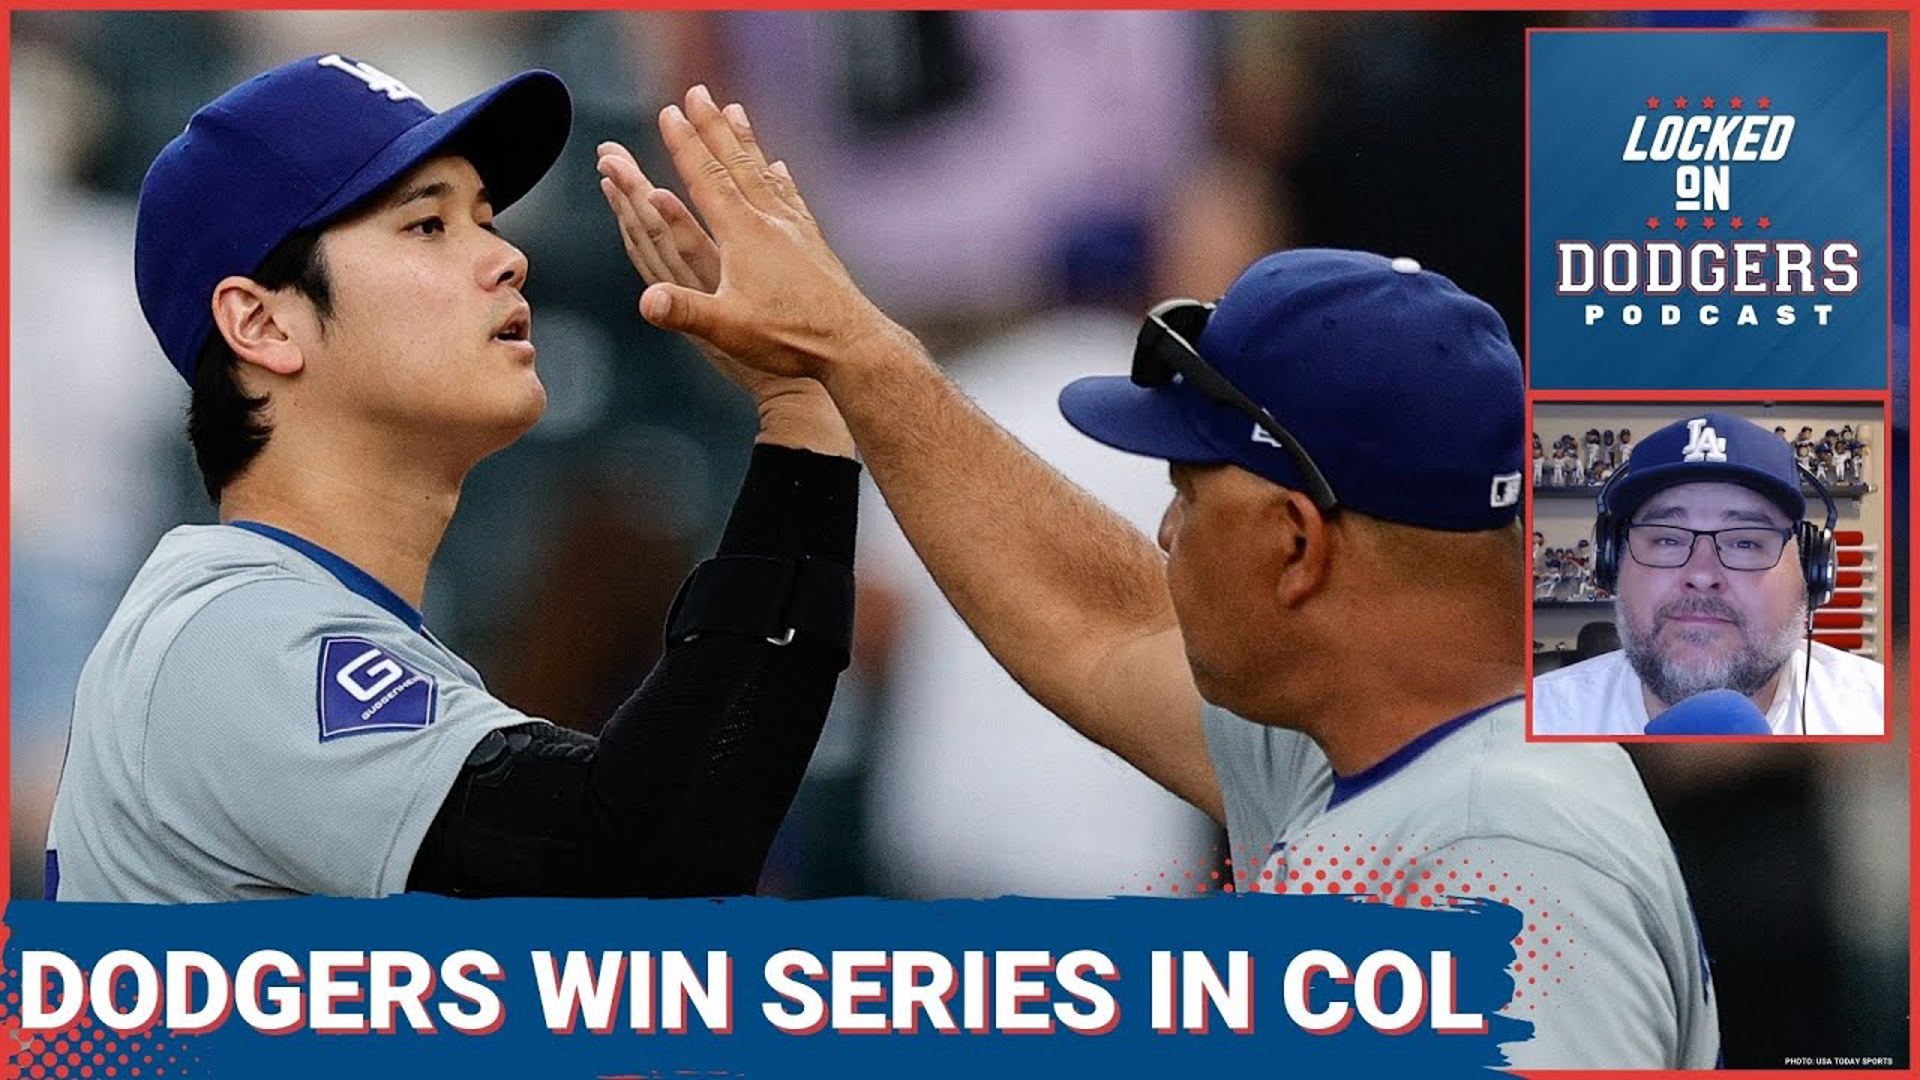 The Los Angeles Dodgers beat the Rockies 5-3 on Thursday afternoon to complete the 3-1 series win in Colorado.